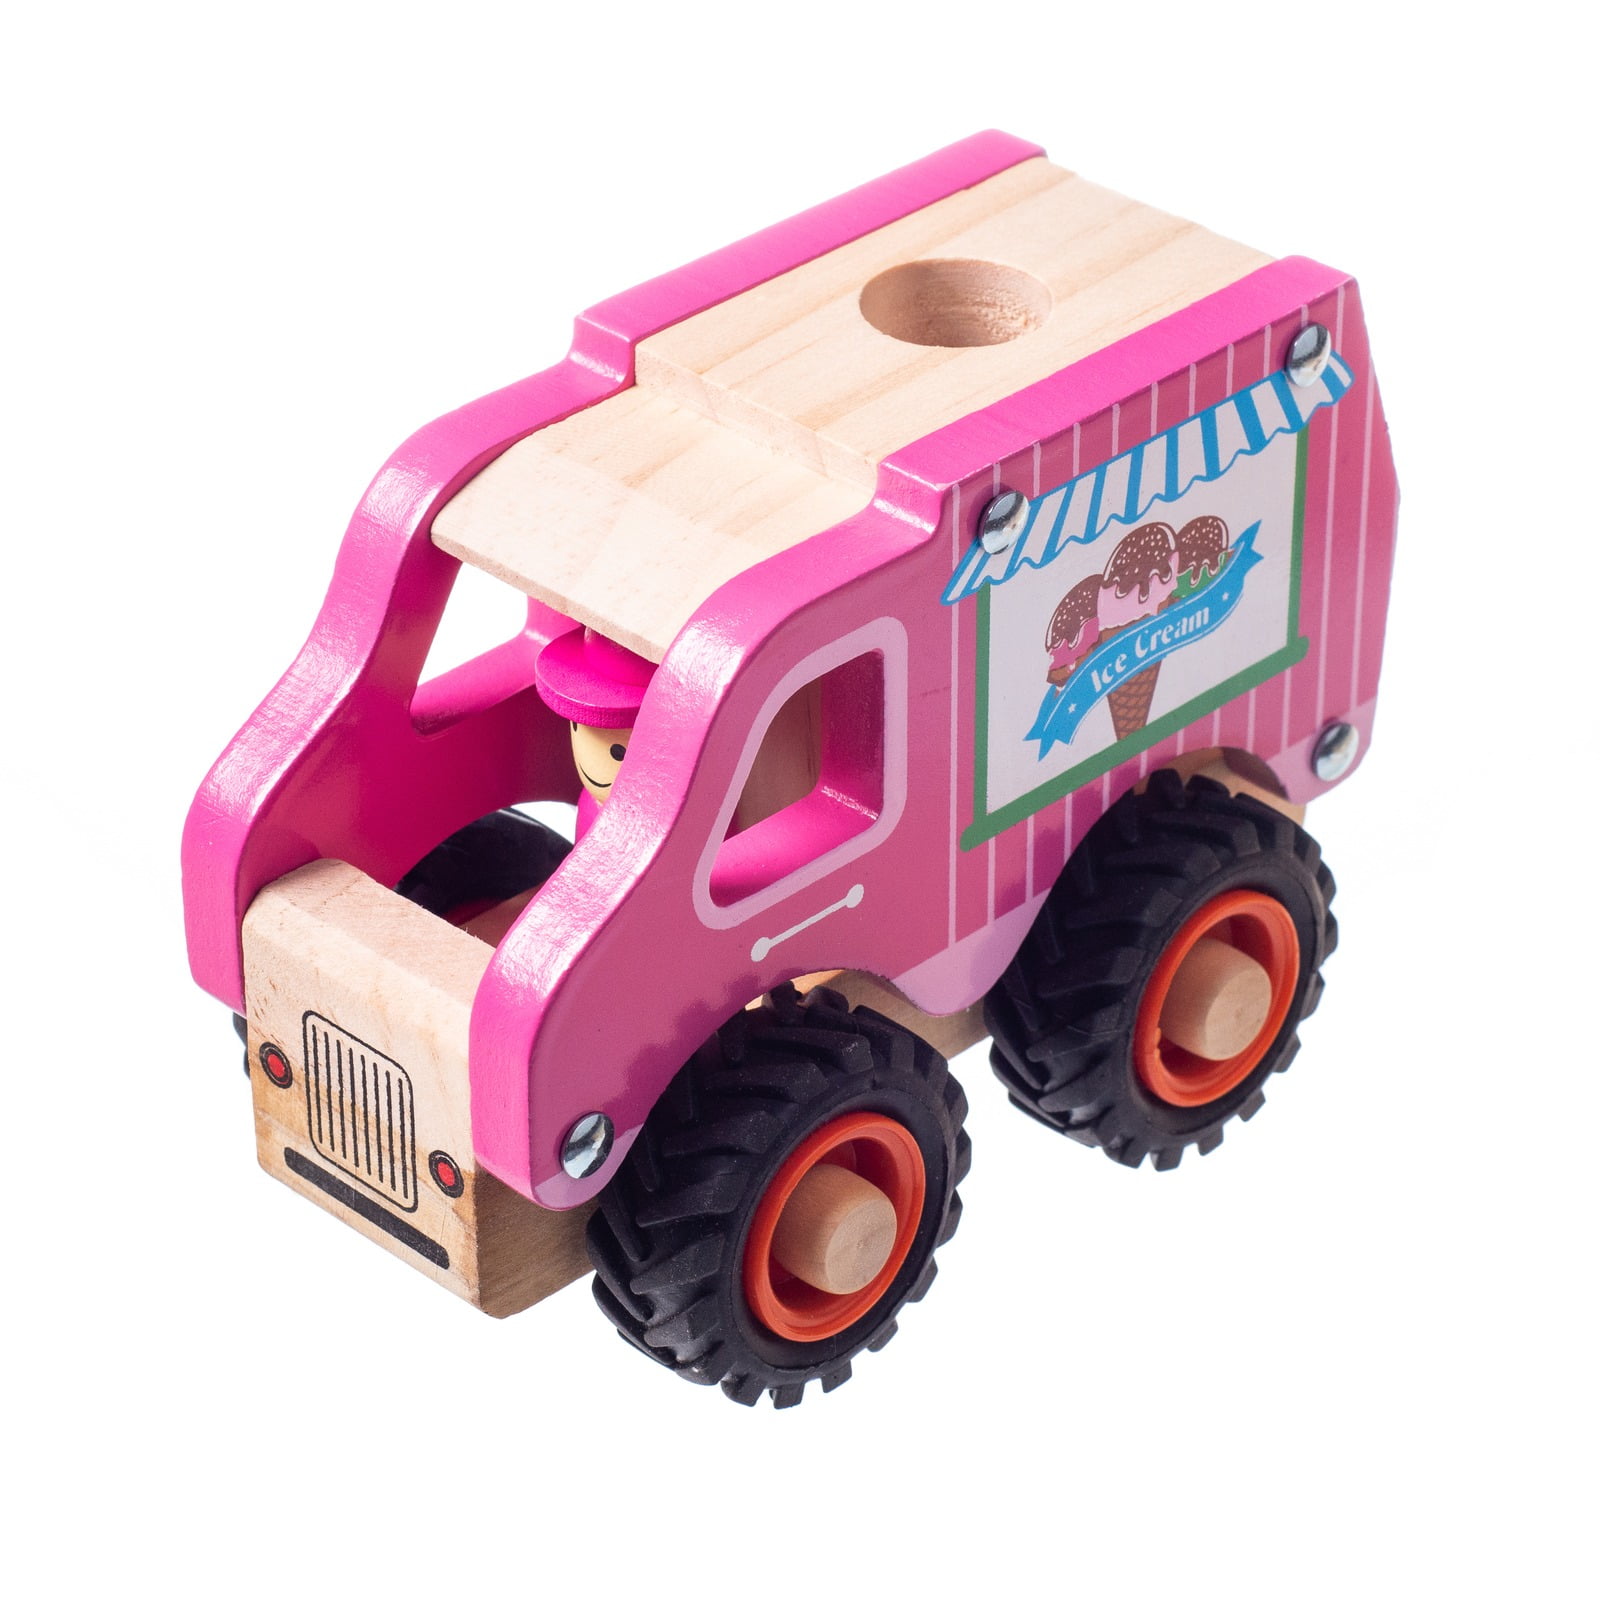 The young artist - Ice Cream Truck - Wooden craft kit for building